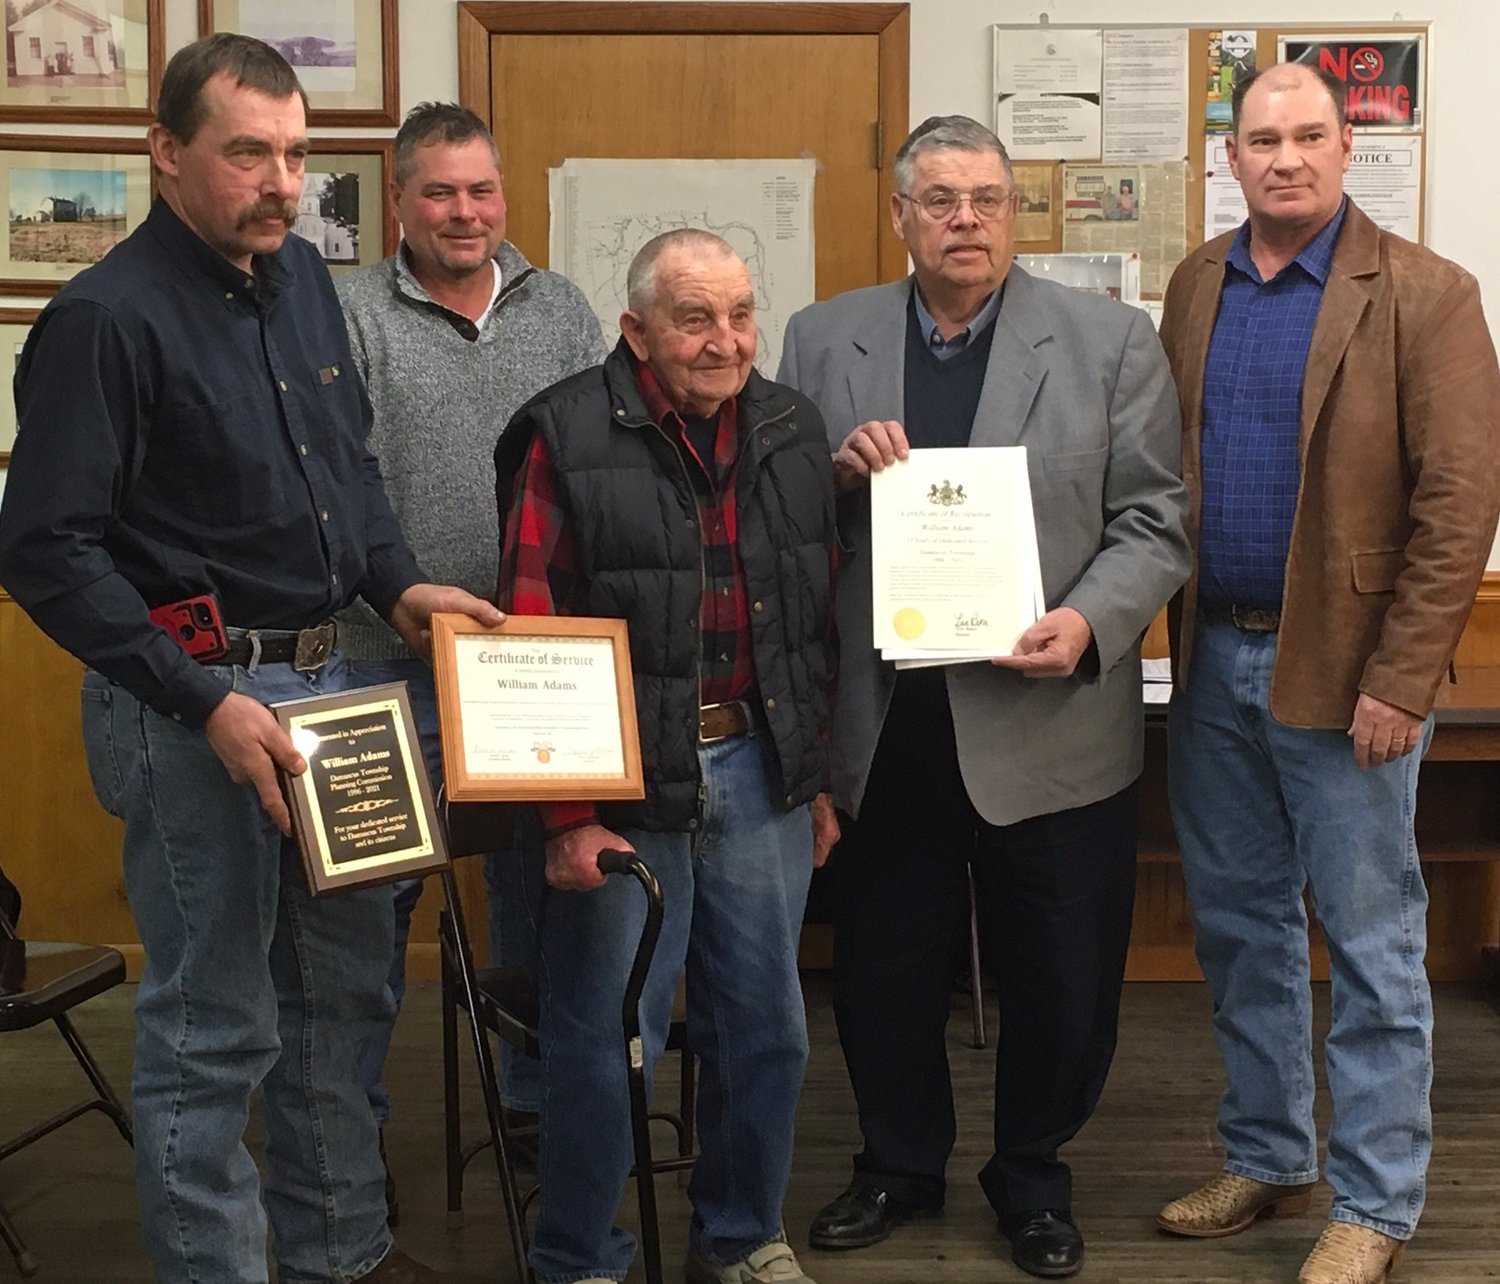 William (Bill) Adams, center, is flanked with this certificates and plaques for his 25 years of service to the Damascus Township Planning Board. To his left, supervisor Joseph Canfield holds one of the plaques, while Tony Herzog, representing Senator Lisa Baker's office, is to the right. Daniel Rutledge, back row, and supervisor Steve Adams pose for the moment.